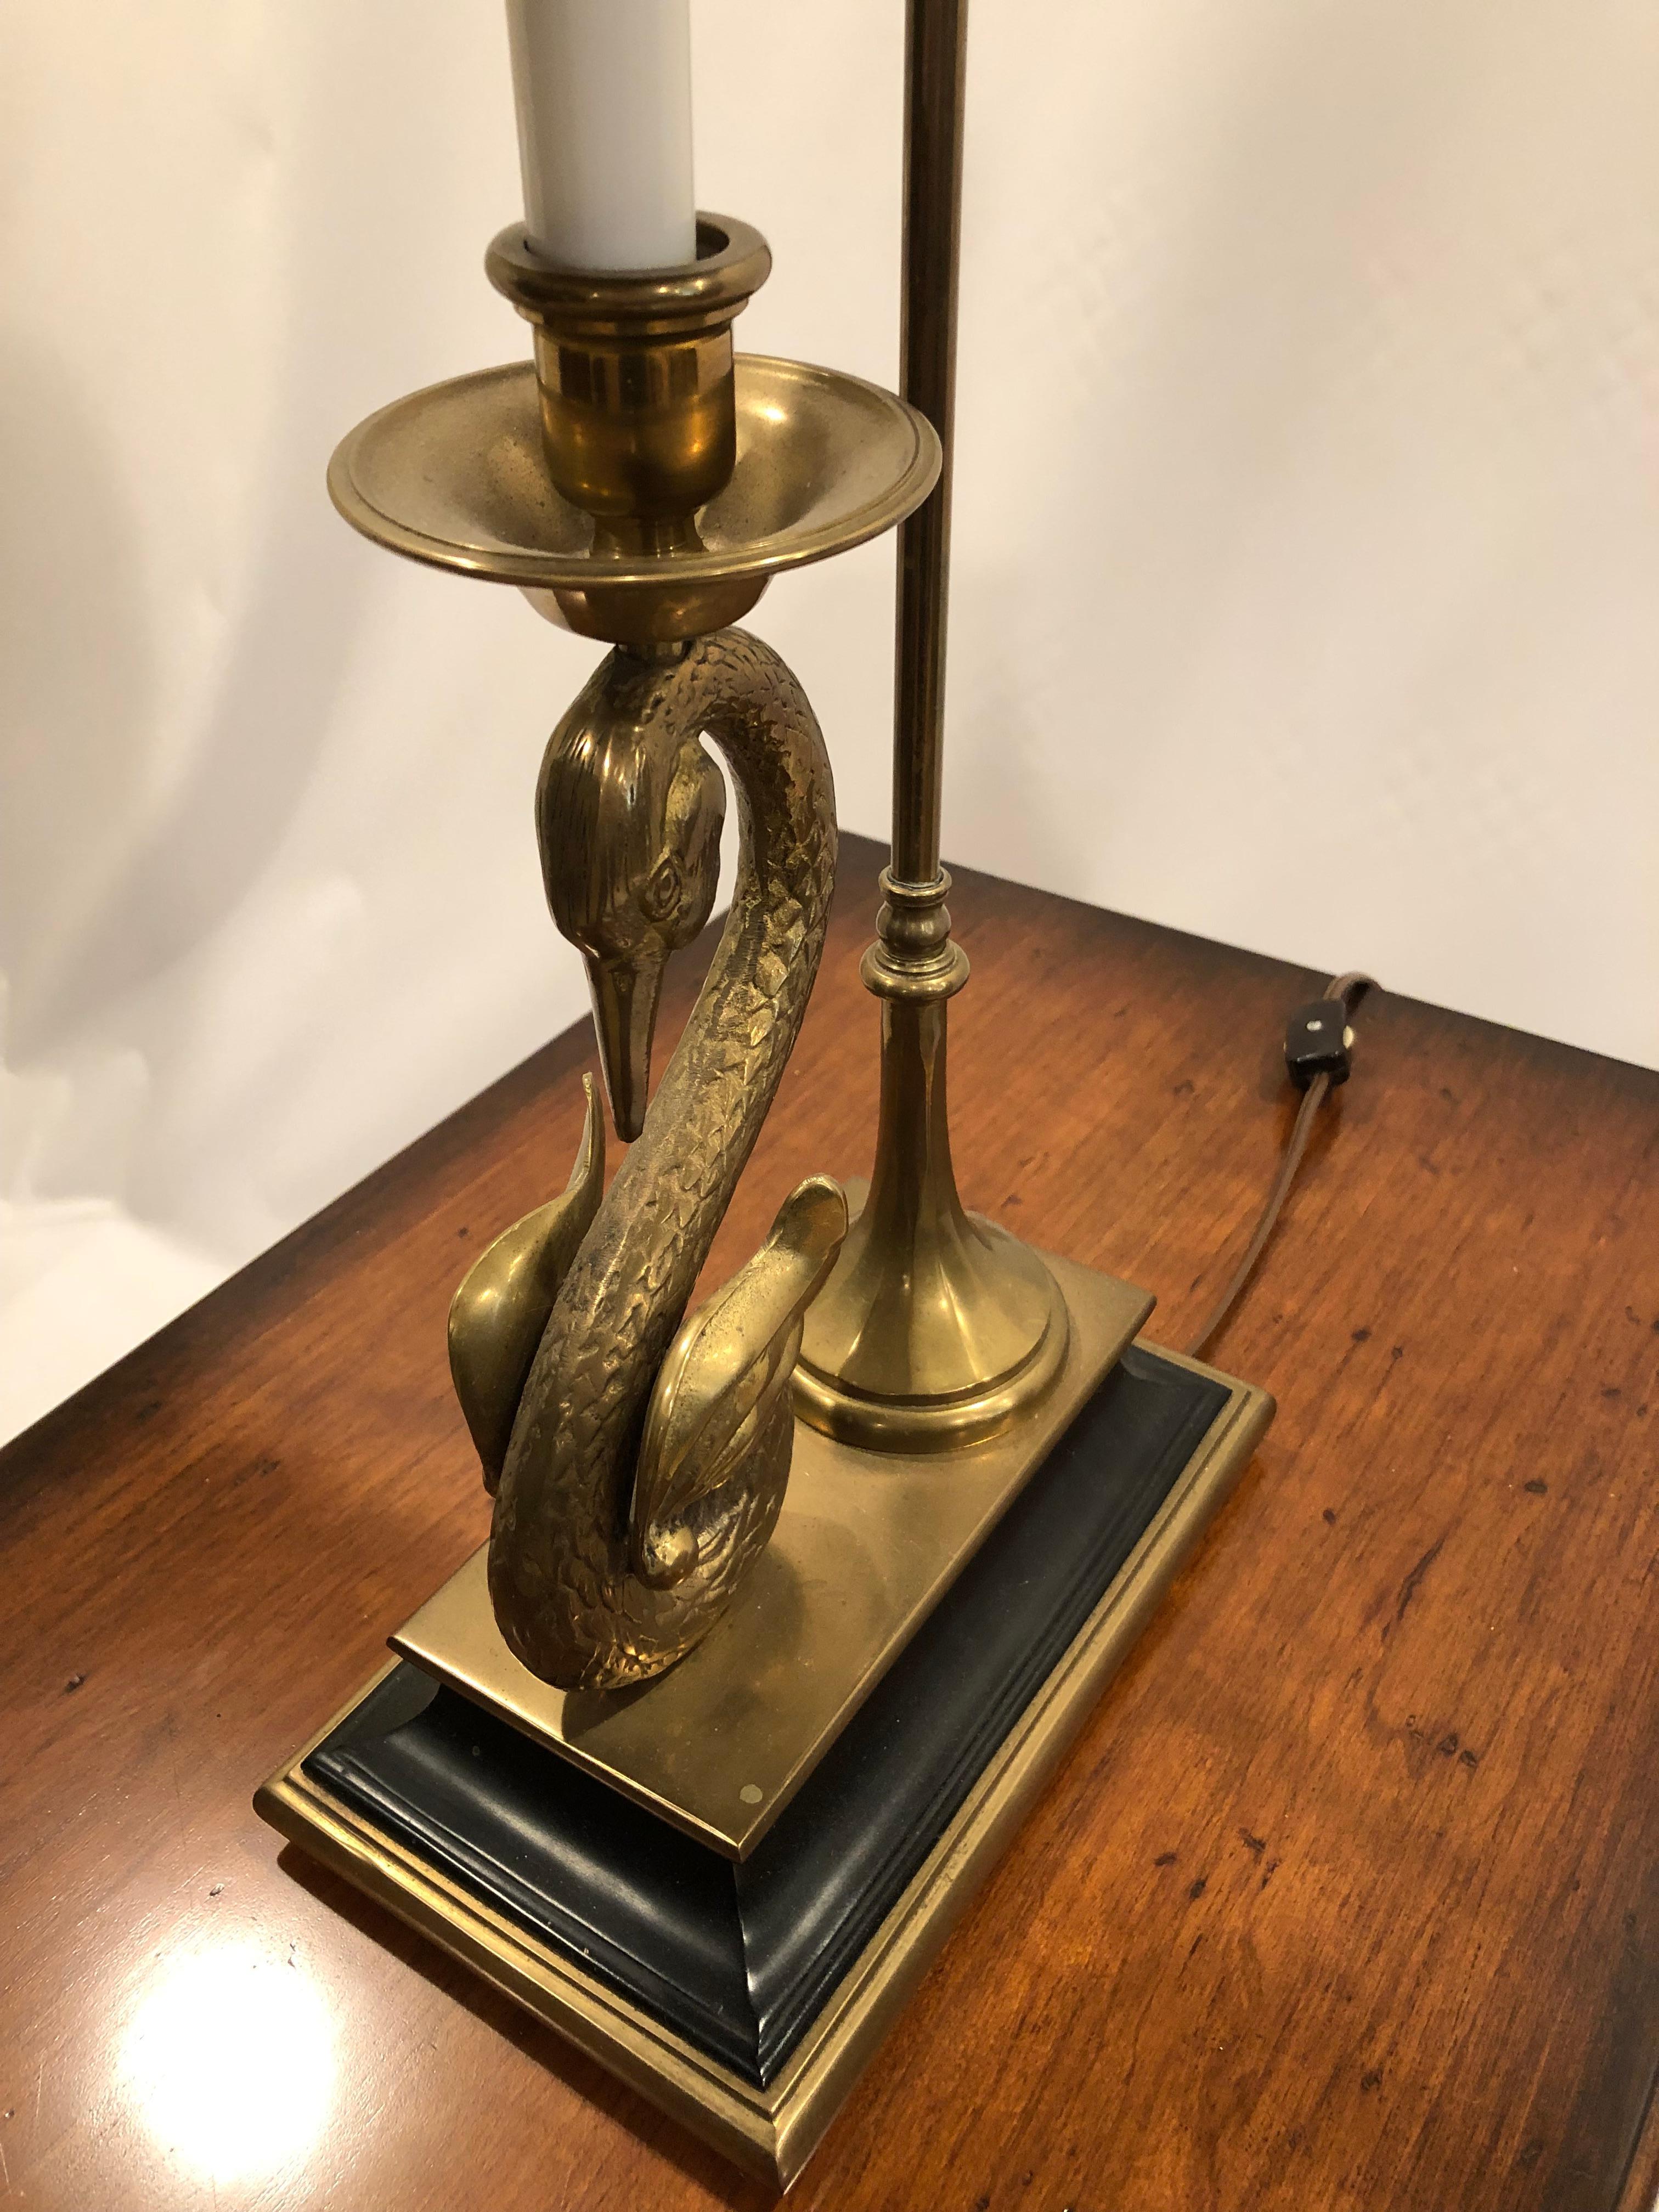 Beautiful classy Chapman table lamp having a brass swan sculptural form on black stand and quirky shaped metal lamp shade.